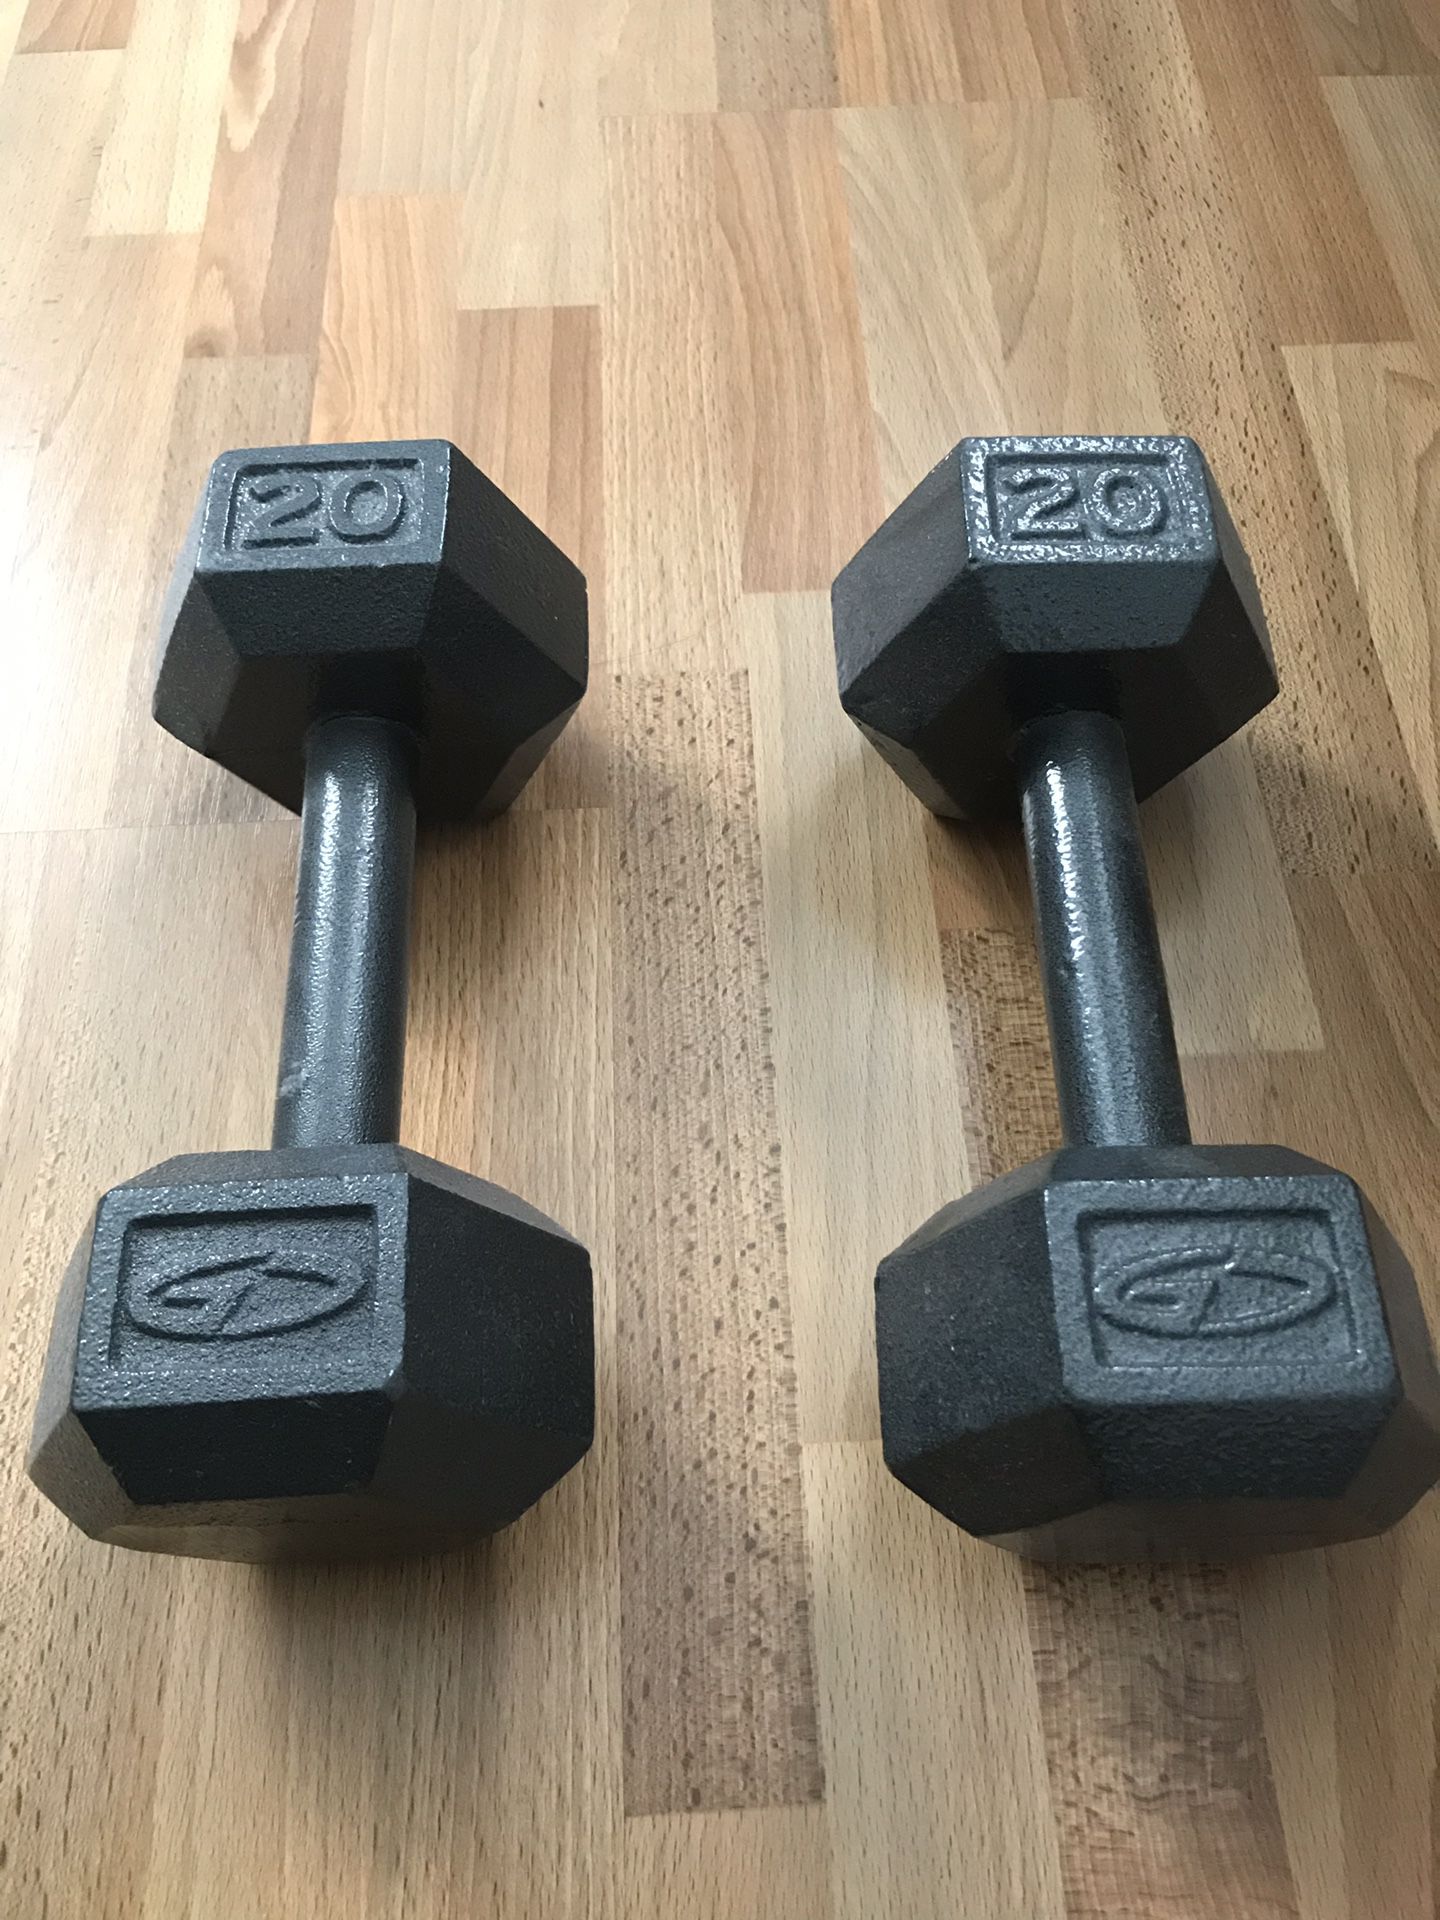 Dumbbells - two 20 pound weights - Cast Iron